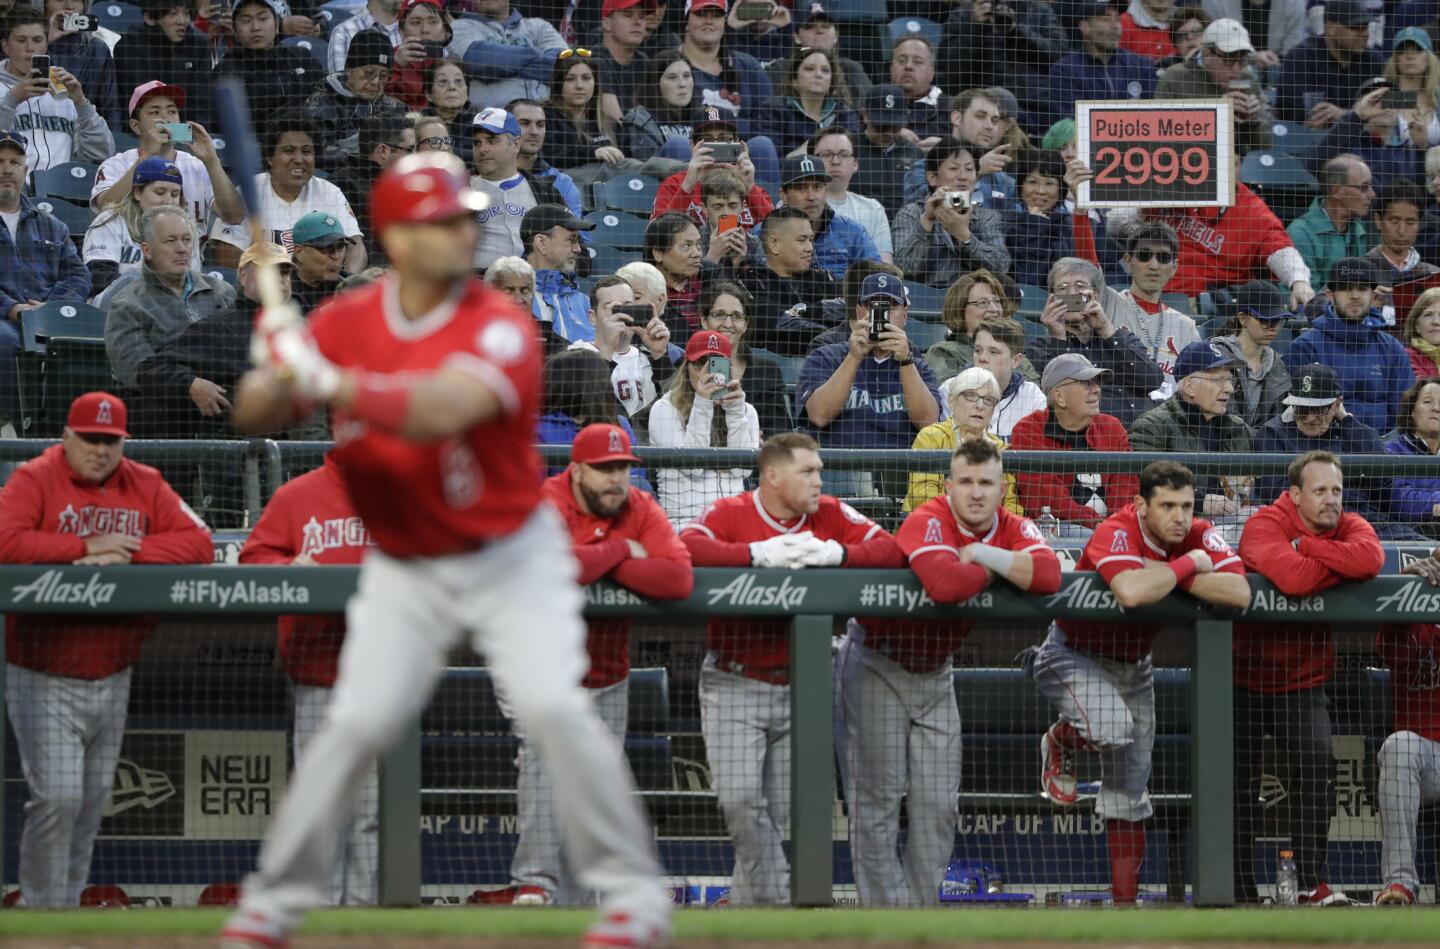 A fan holds up a sign of the current number of hits by Los Angeles Angels' Albert Pujols as he comes to the plate in the fourth inning of a baseball game against the Seattle Mariners Friday, May 4, 2018, in Seattle. Pujols hit a single in the fifth inning, the 3,000th hit of his career. (AP Photo/Elaine Thompson)